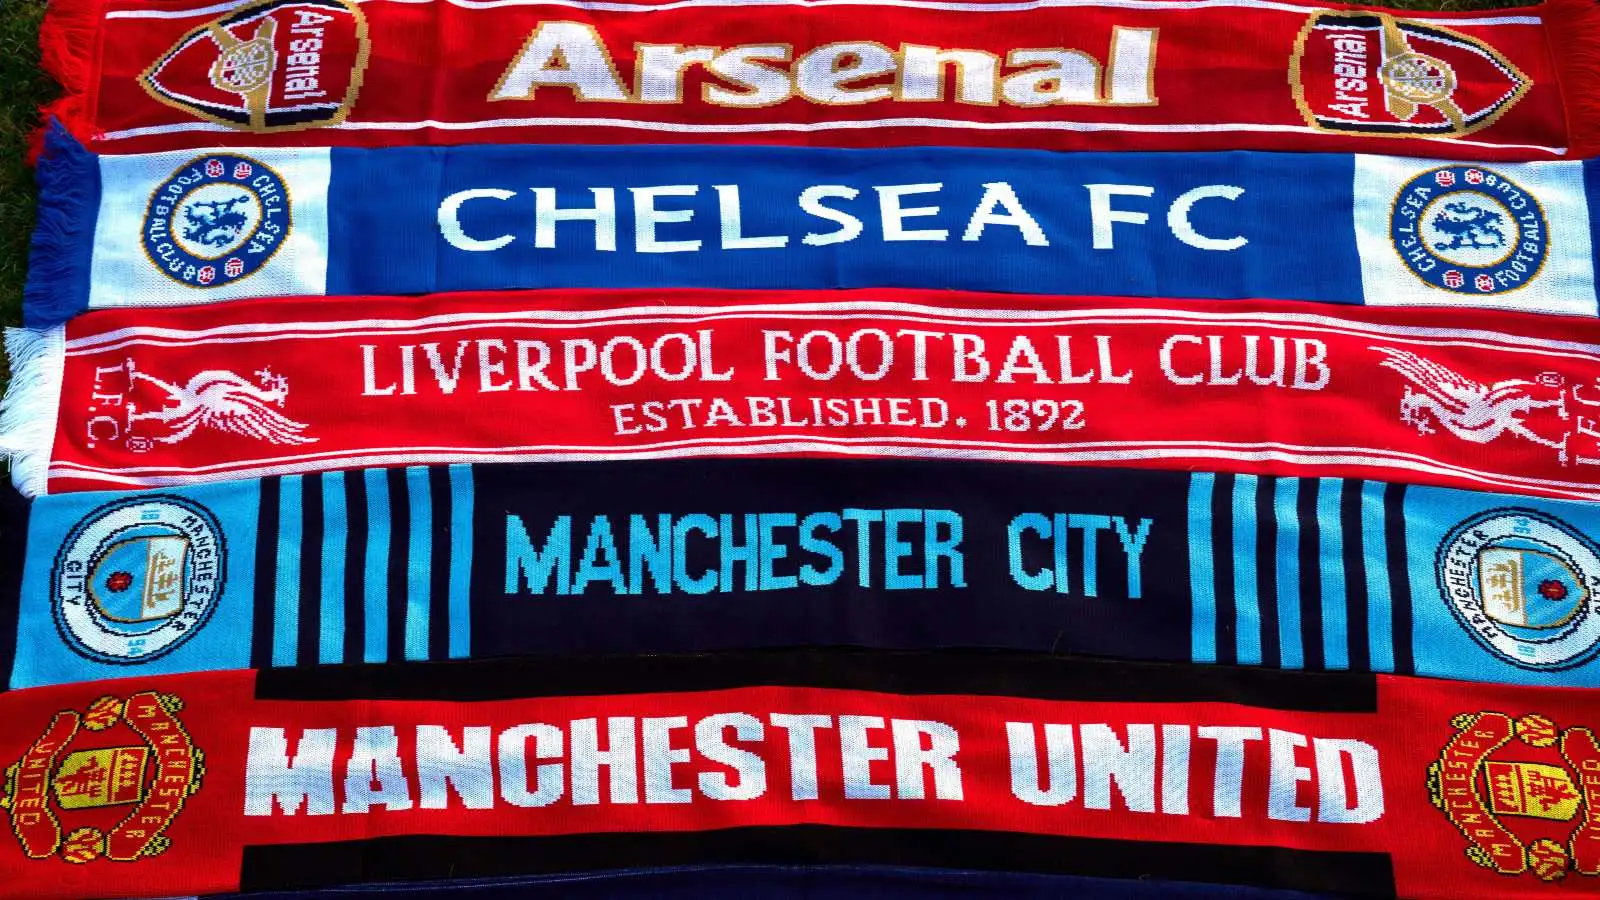 Ranked: The World's Most Valuable Football Club Brands